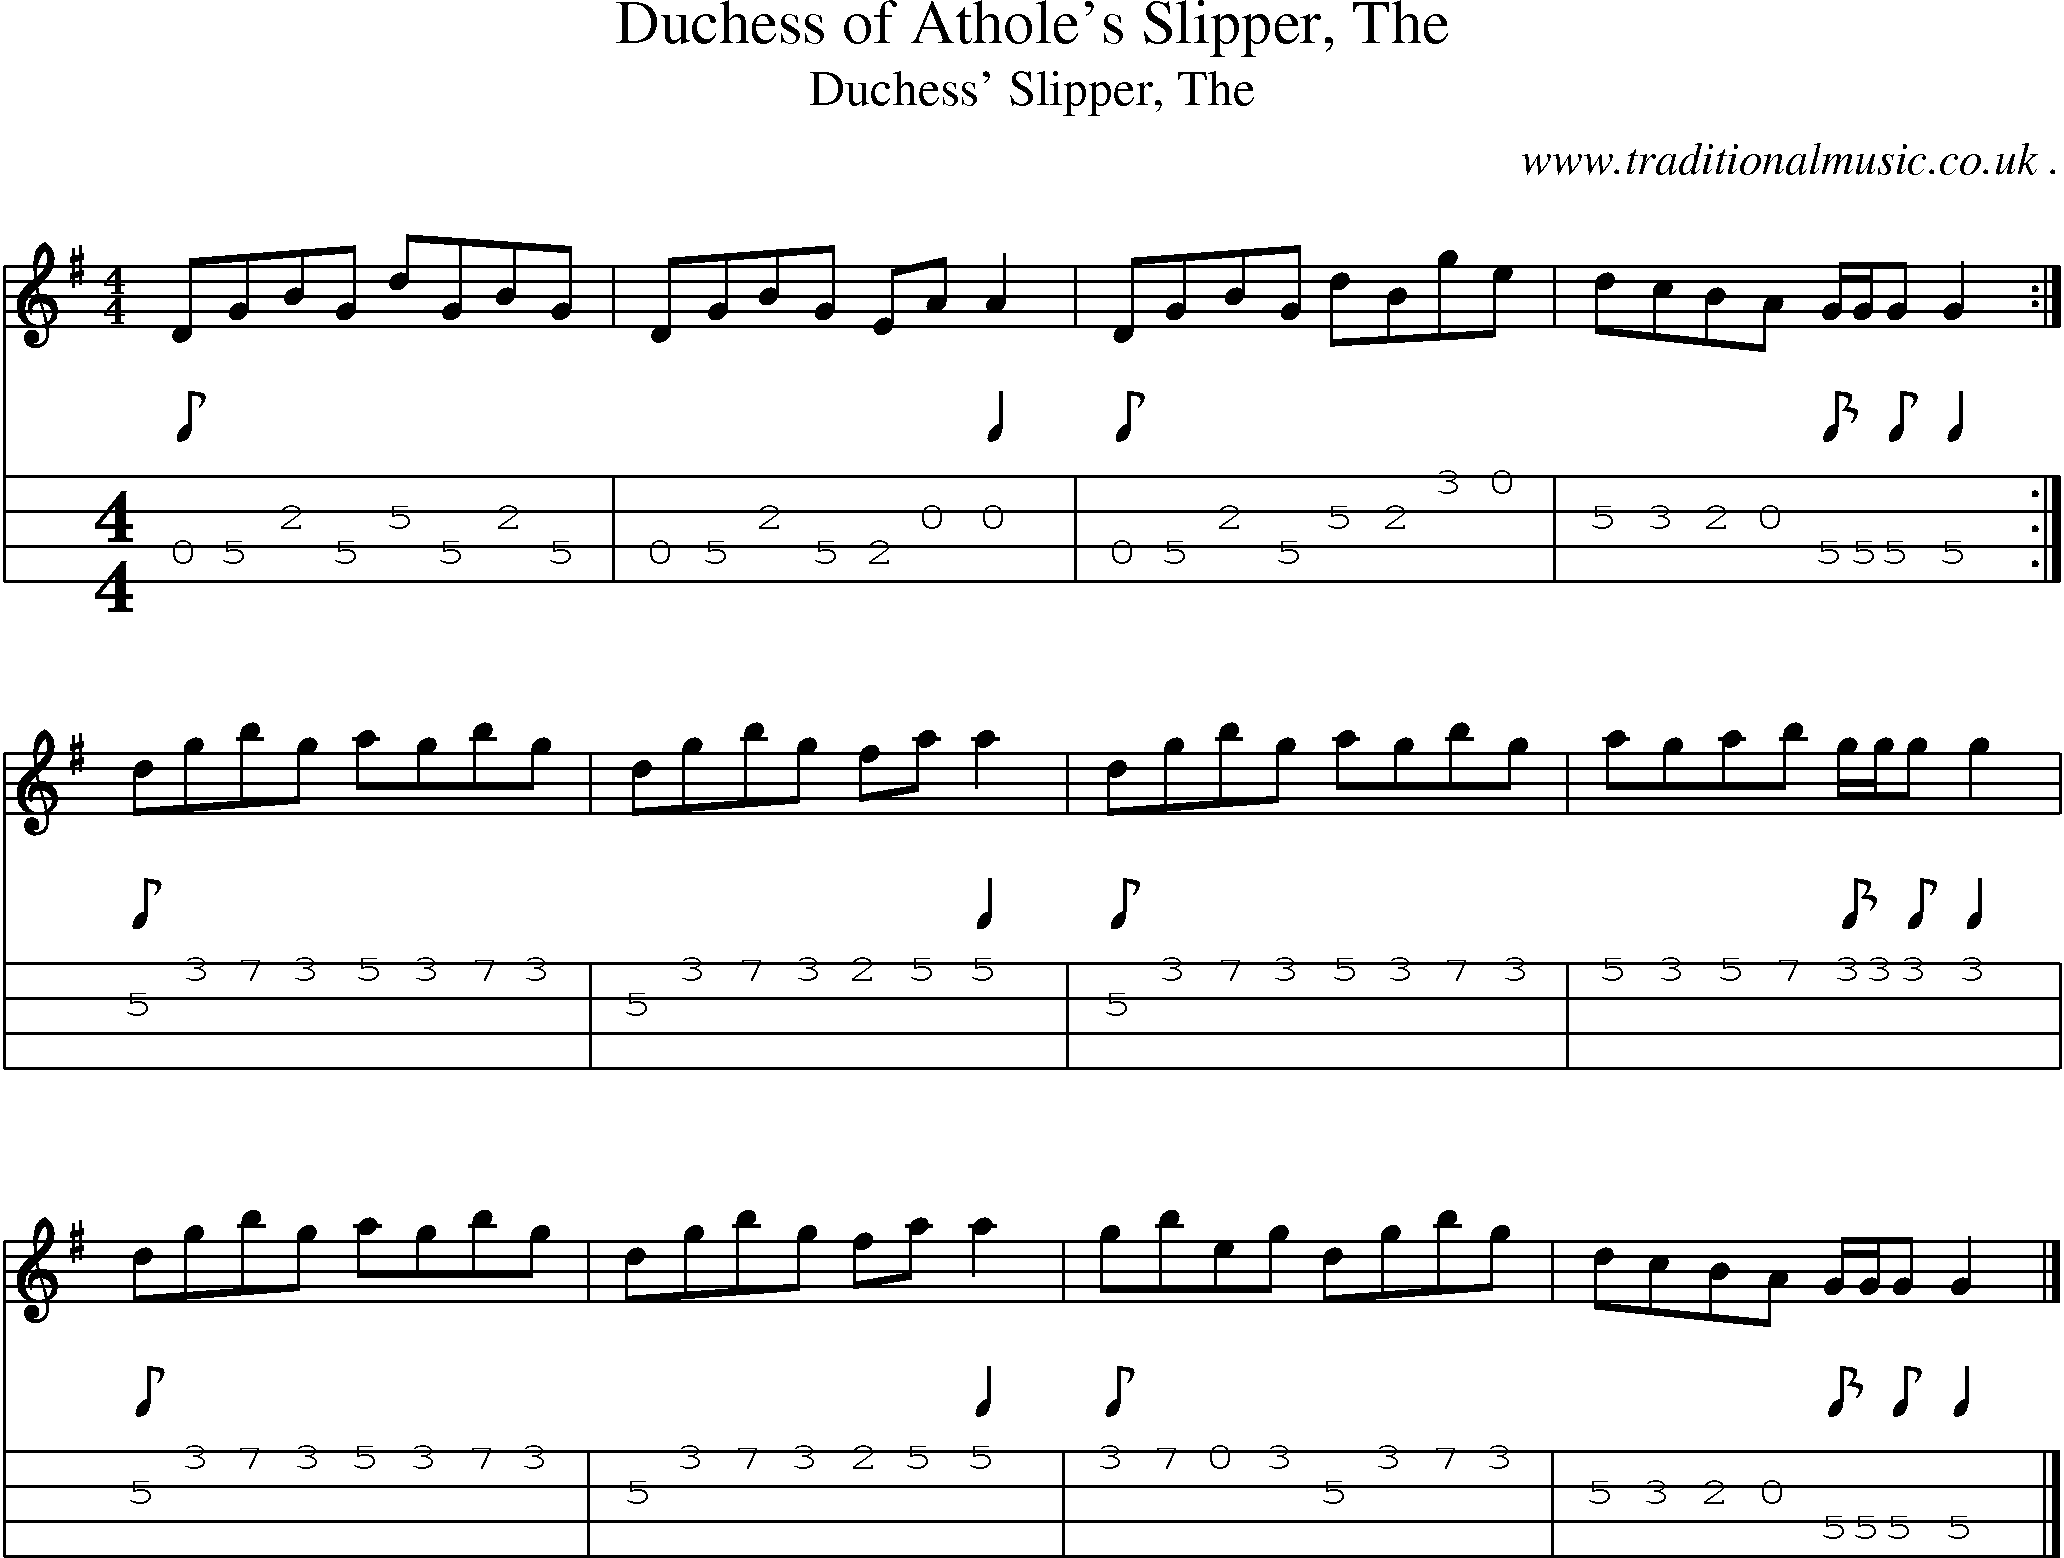 Sheet-music  score, Chords and Mandolin Tabs for Duchess Of Atholes Slipper The